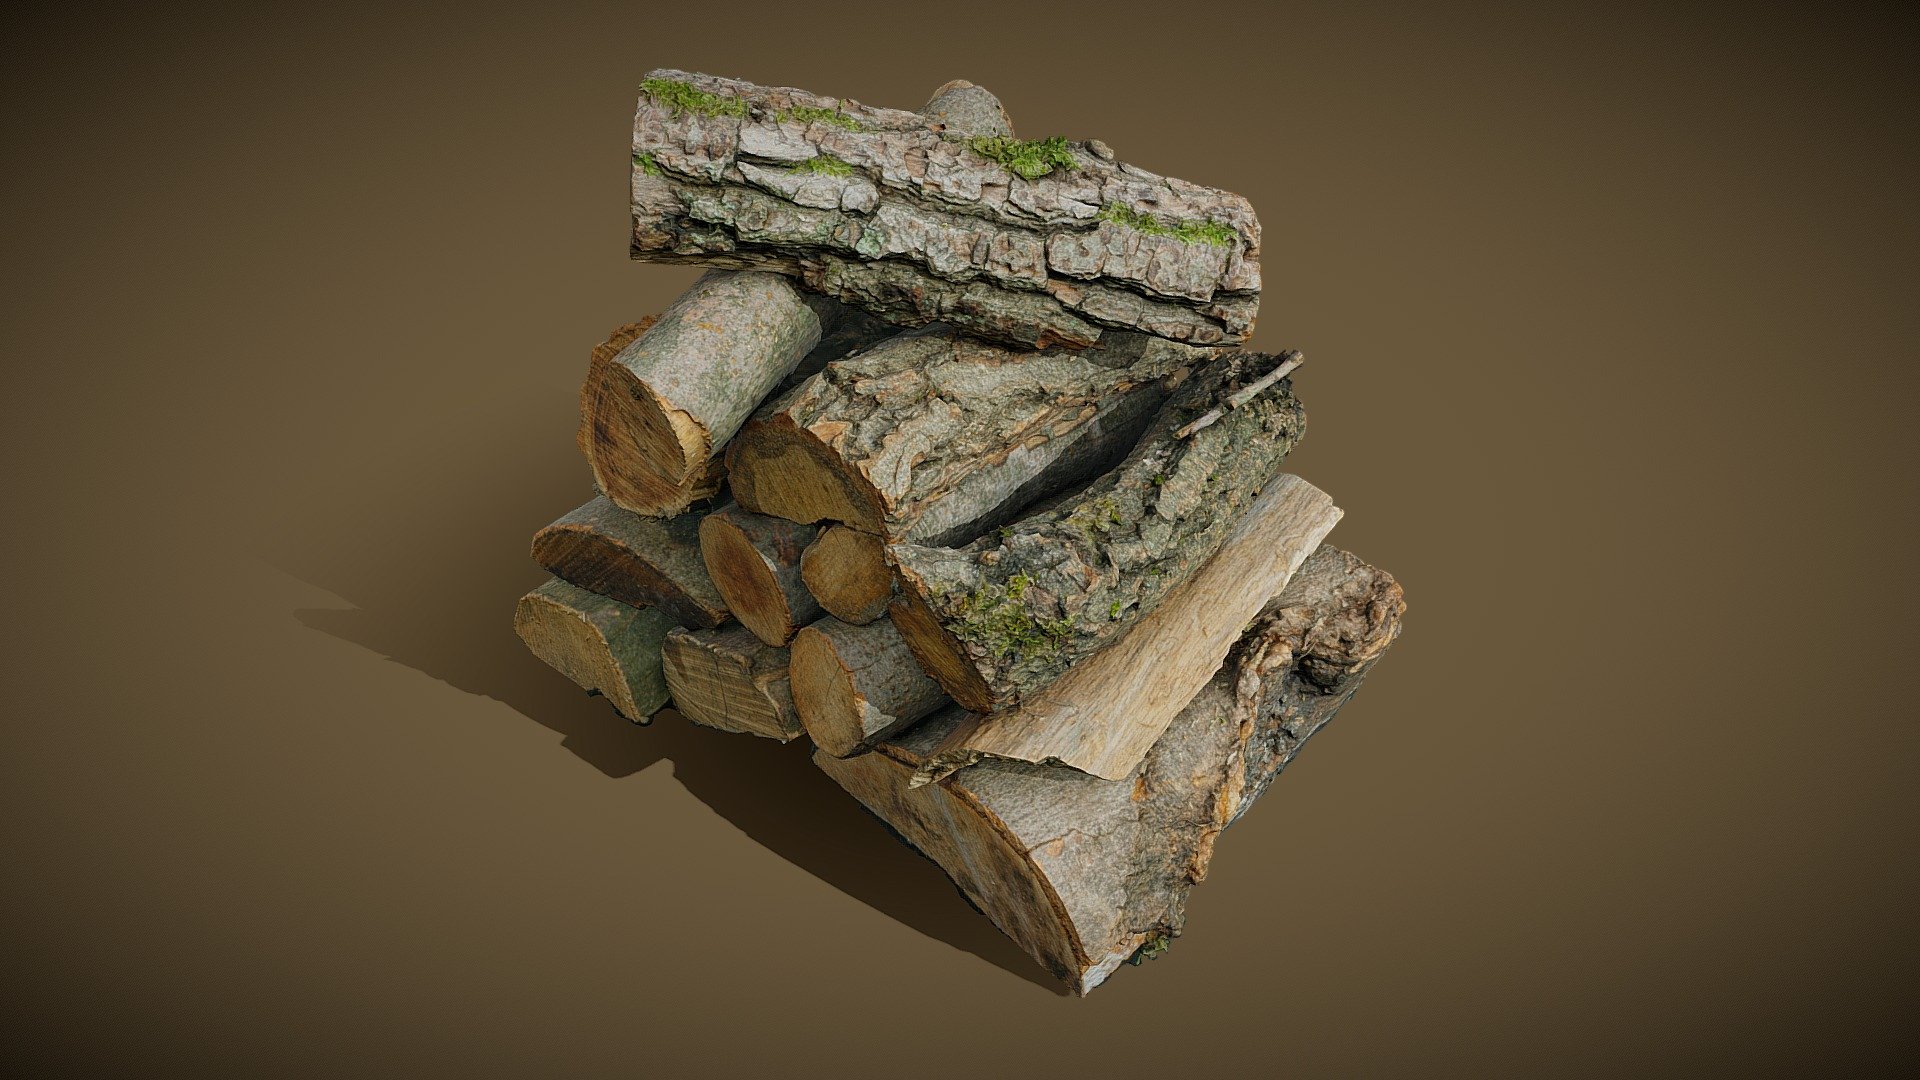 Stacked firewood

Model 3D created in RC from 157 images (sony a6000)

Download version:

FBX Triangles: 10 K Textures: 2x8192x8192u1v1 jpg + normal

FBX Triangles: 100 K Textures: 2x8192x8192u1v1 jpg + normal

FBX Triangles: 1 mln Textures: 2x8192x8192u1v1 jpg + normal

All normal maps generated from 3D model with 30 mln triangles.

If you like my work leave a like or comment and follow me for more! Thanks :) - Stacked firewood - Download Free 3D model by archiwum_xyz 3d model